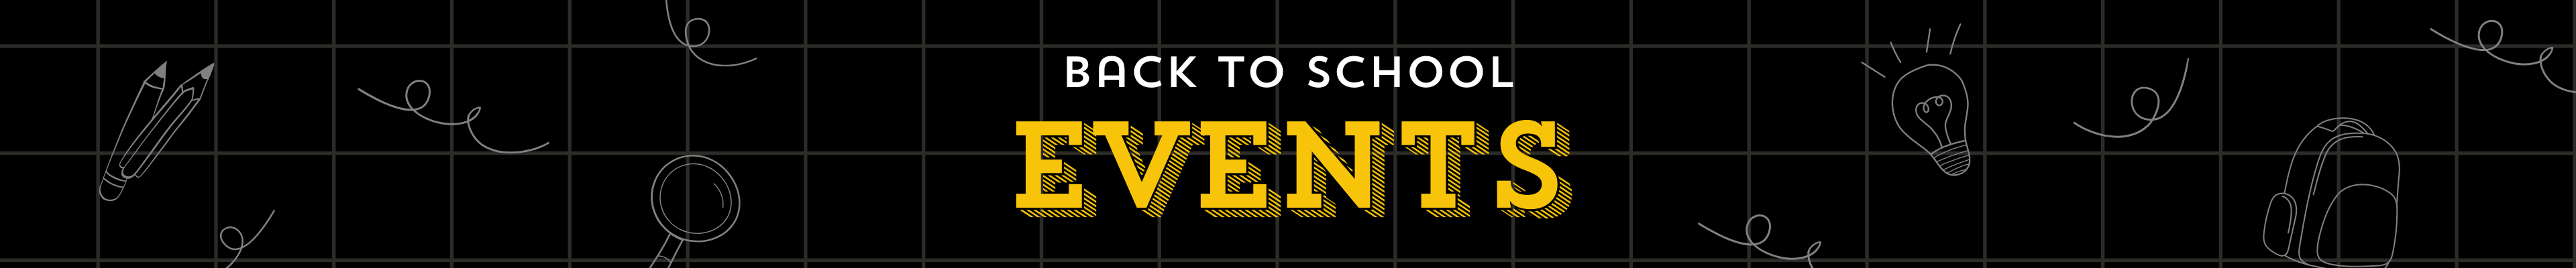 Back to school events